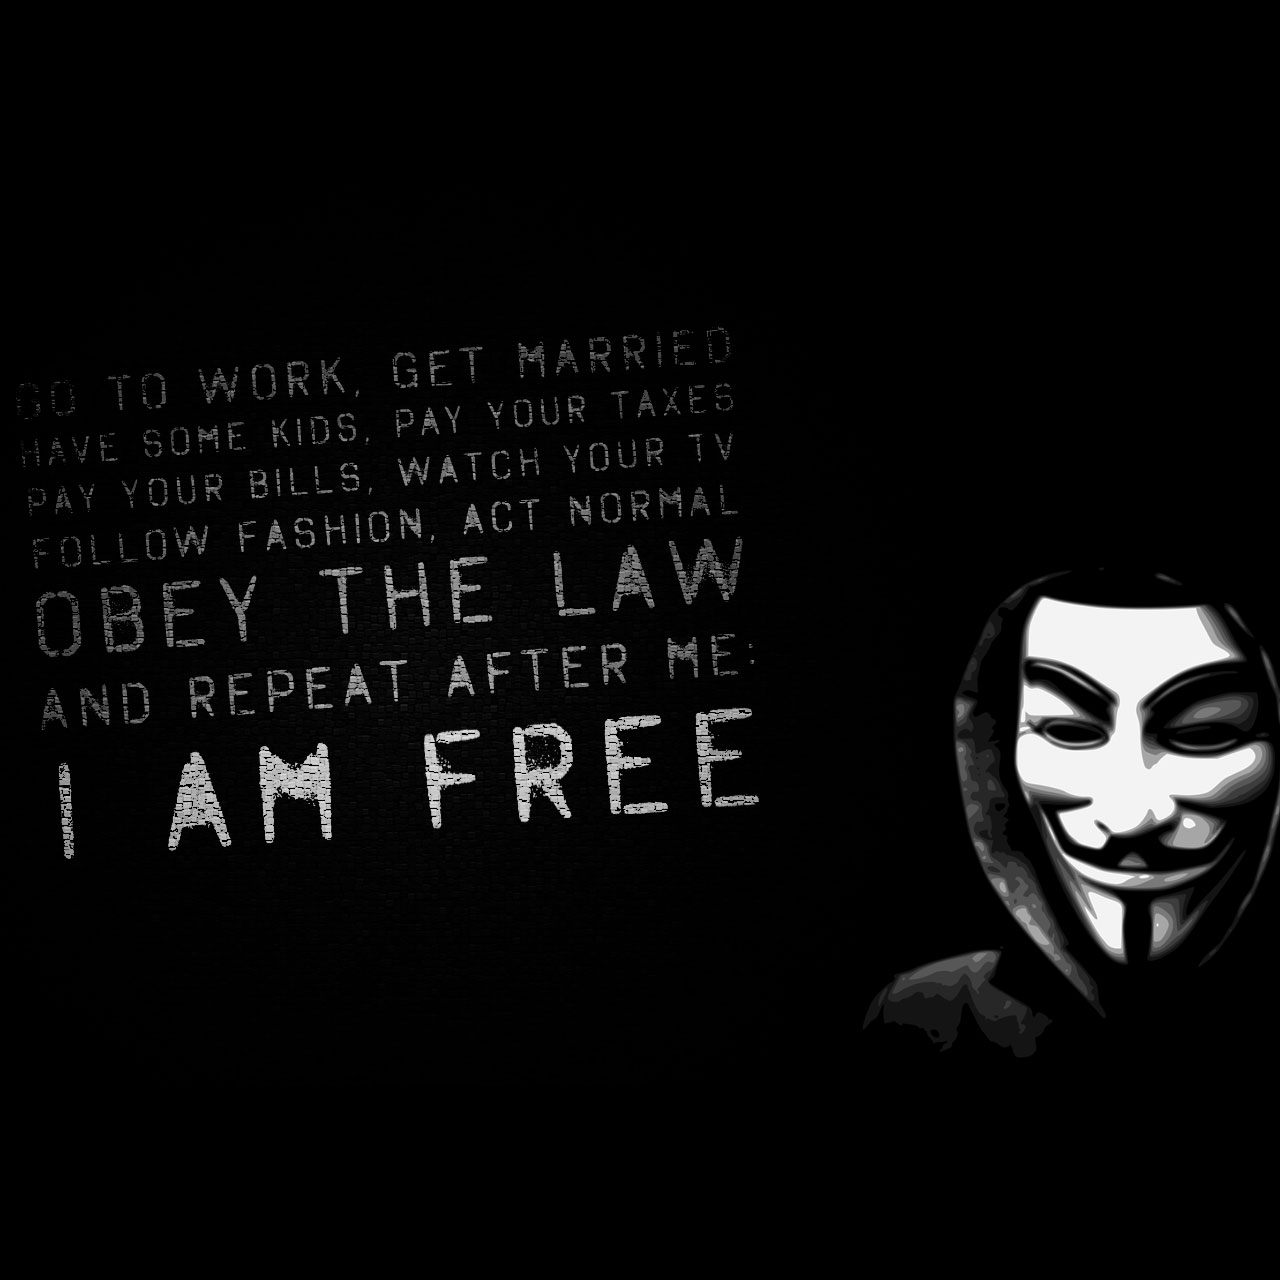 HD Wallpaper X Anonymous Grunge Hacking Guy Fawkes Top Manipulations